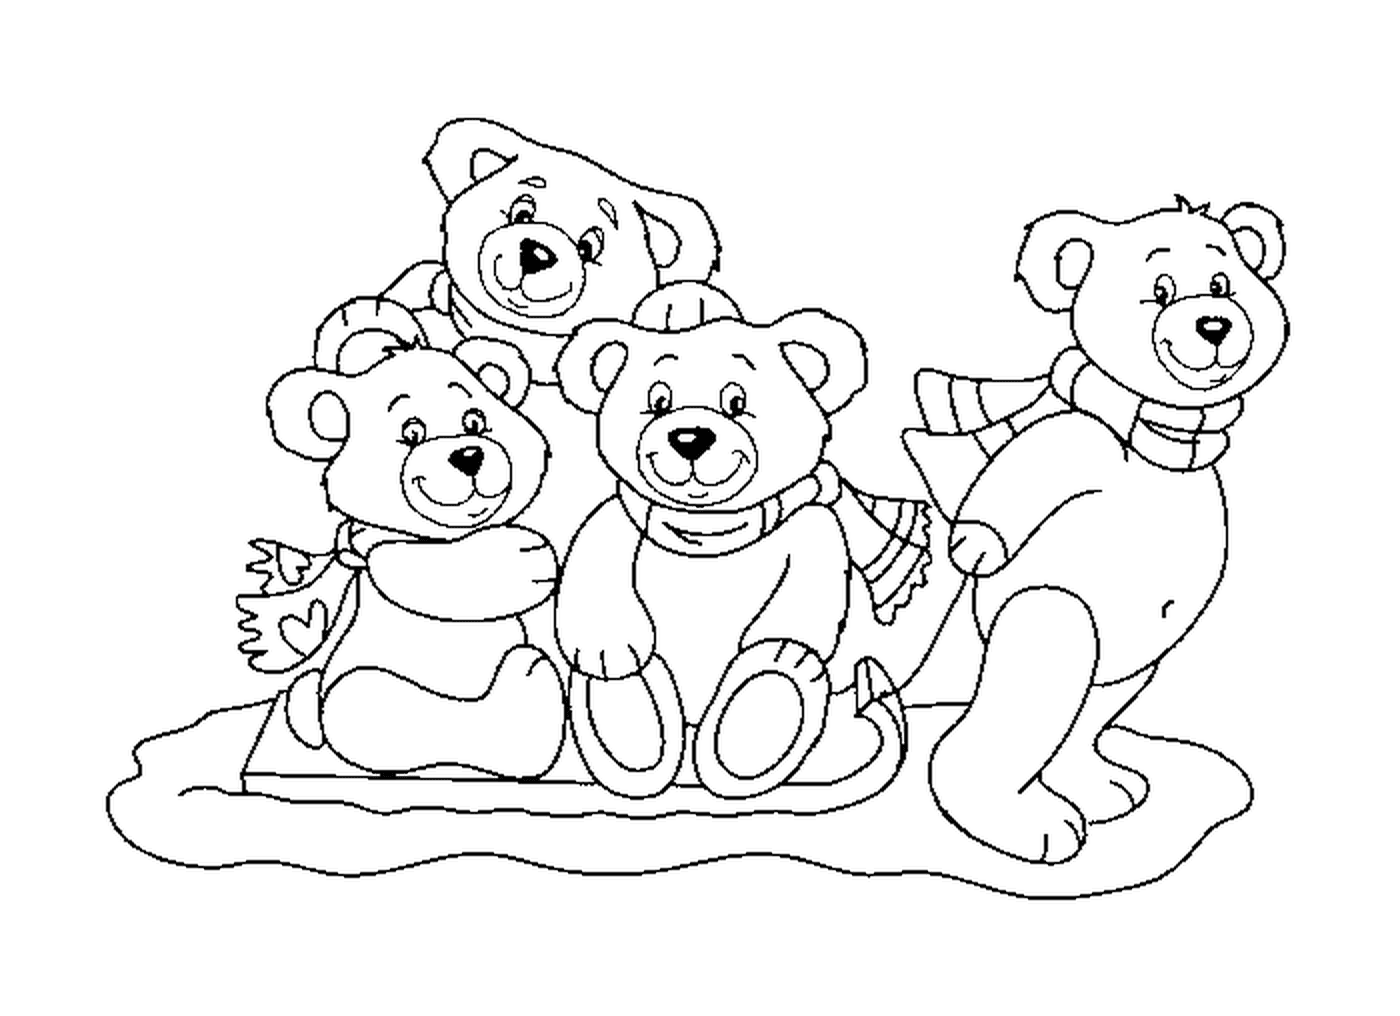   Famille d'ours nounours 